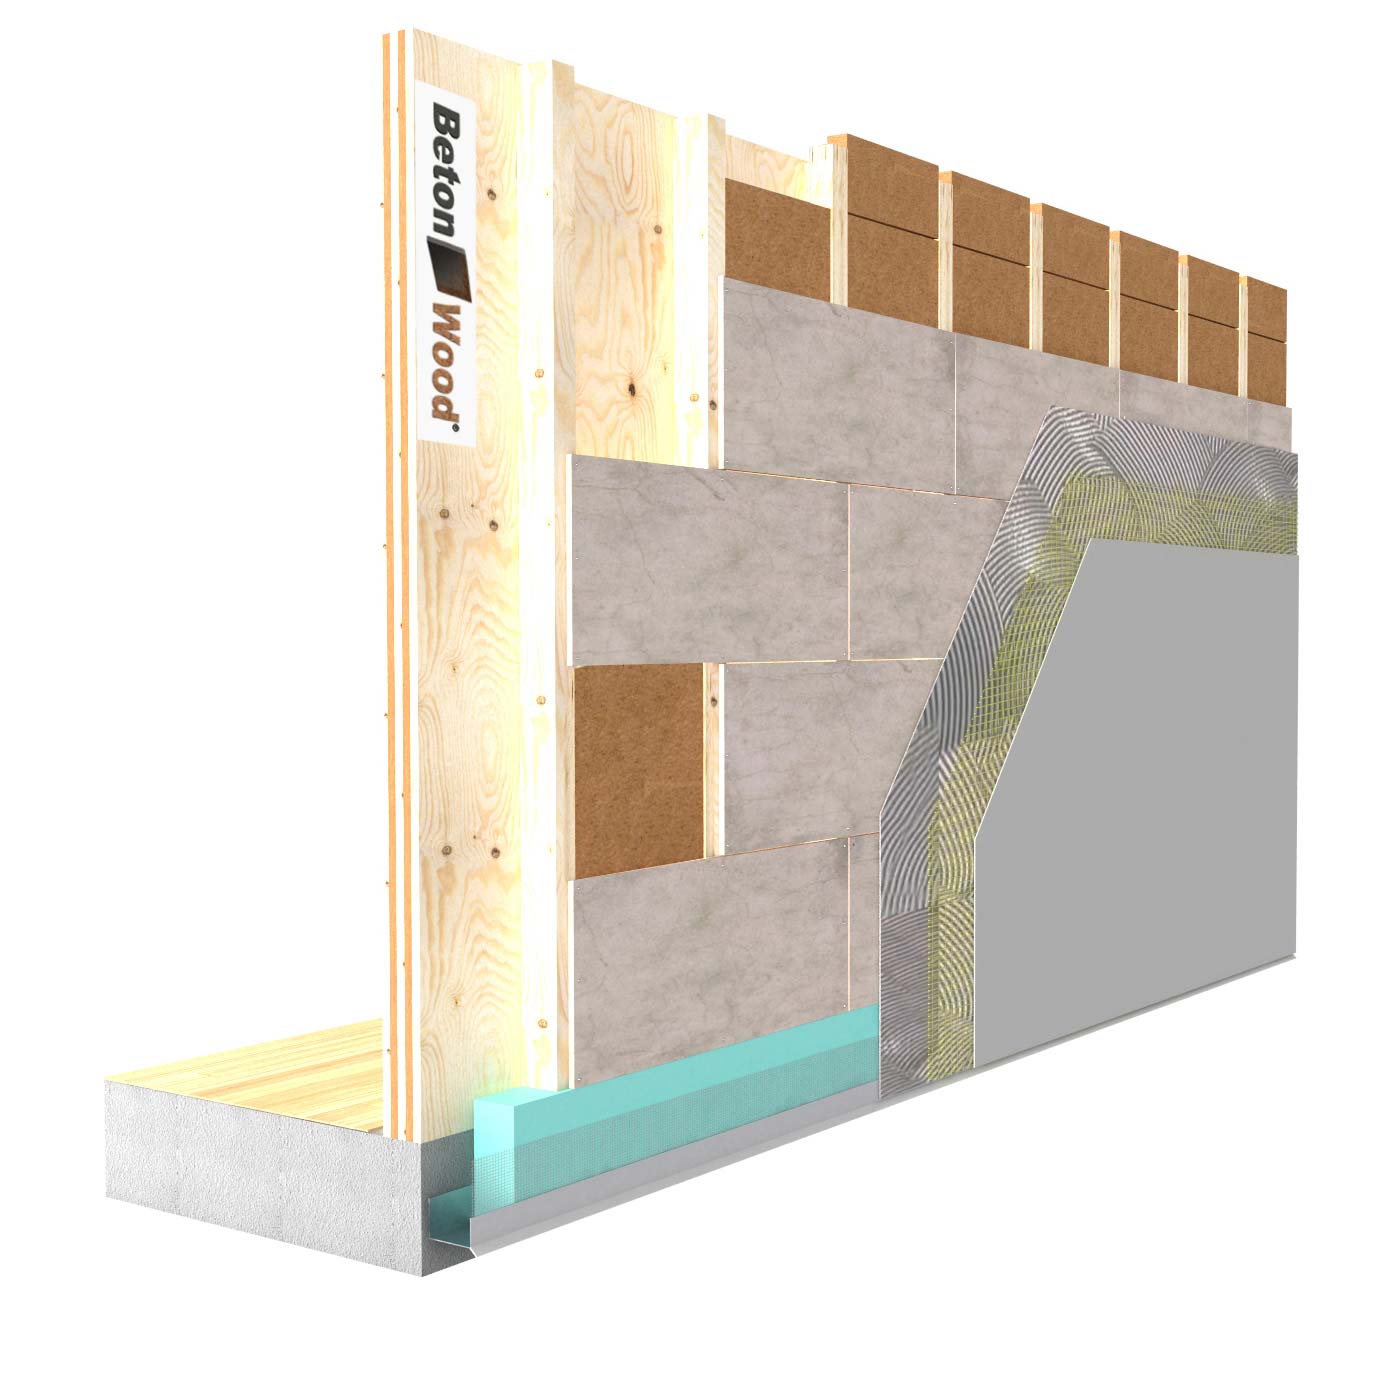 External insulation system with Fiber Wood FiberTherm and cement bonded particle board on X-Lam